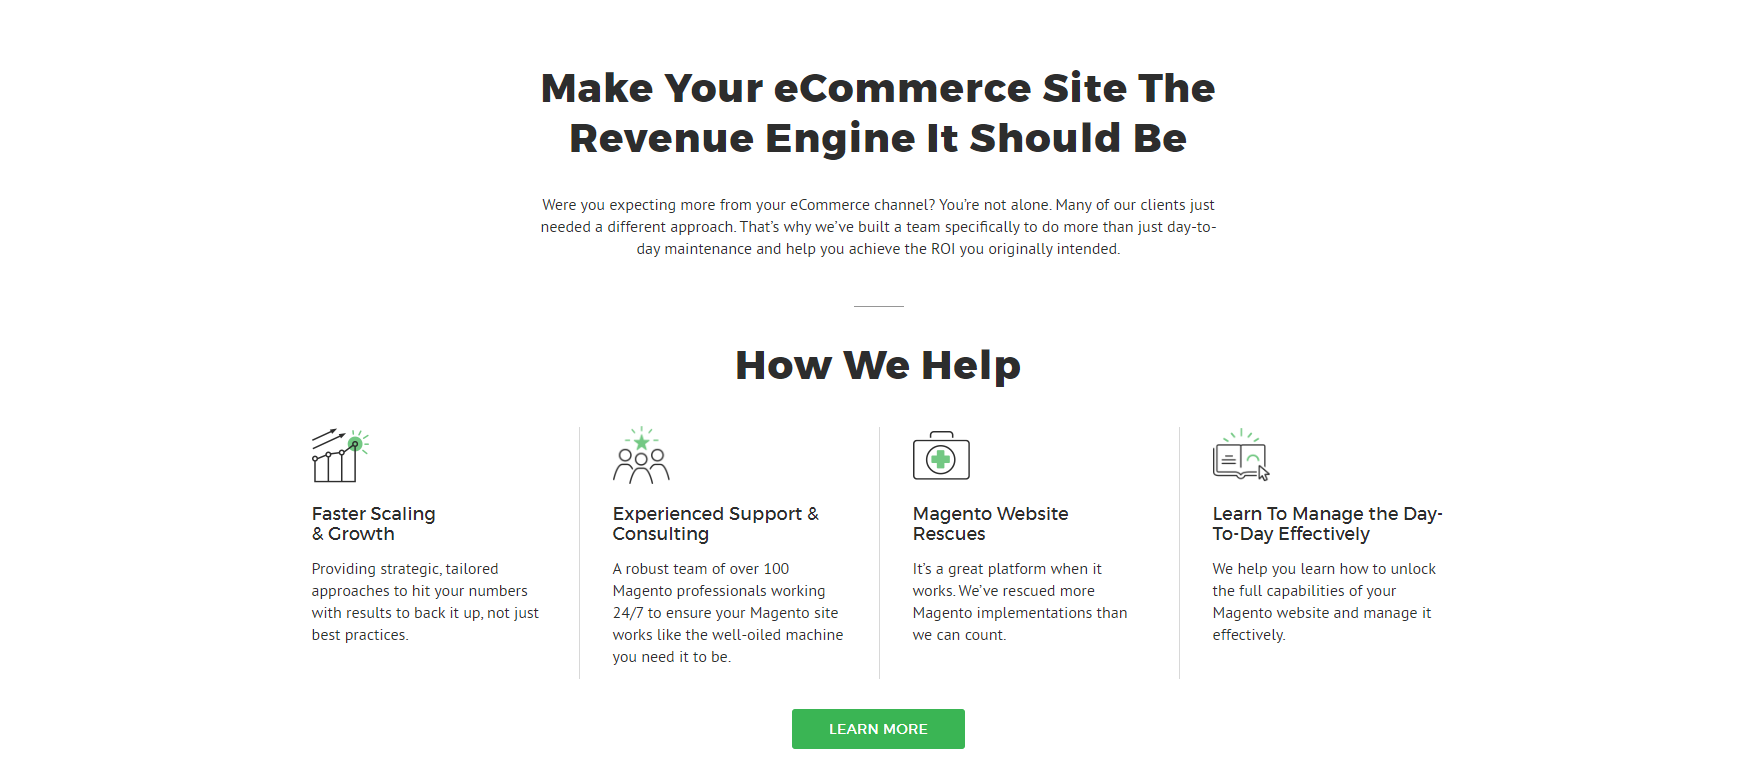  Web Design is a highly reputed company that specializes in custom-tailored eCommerce solutions